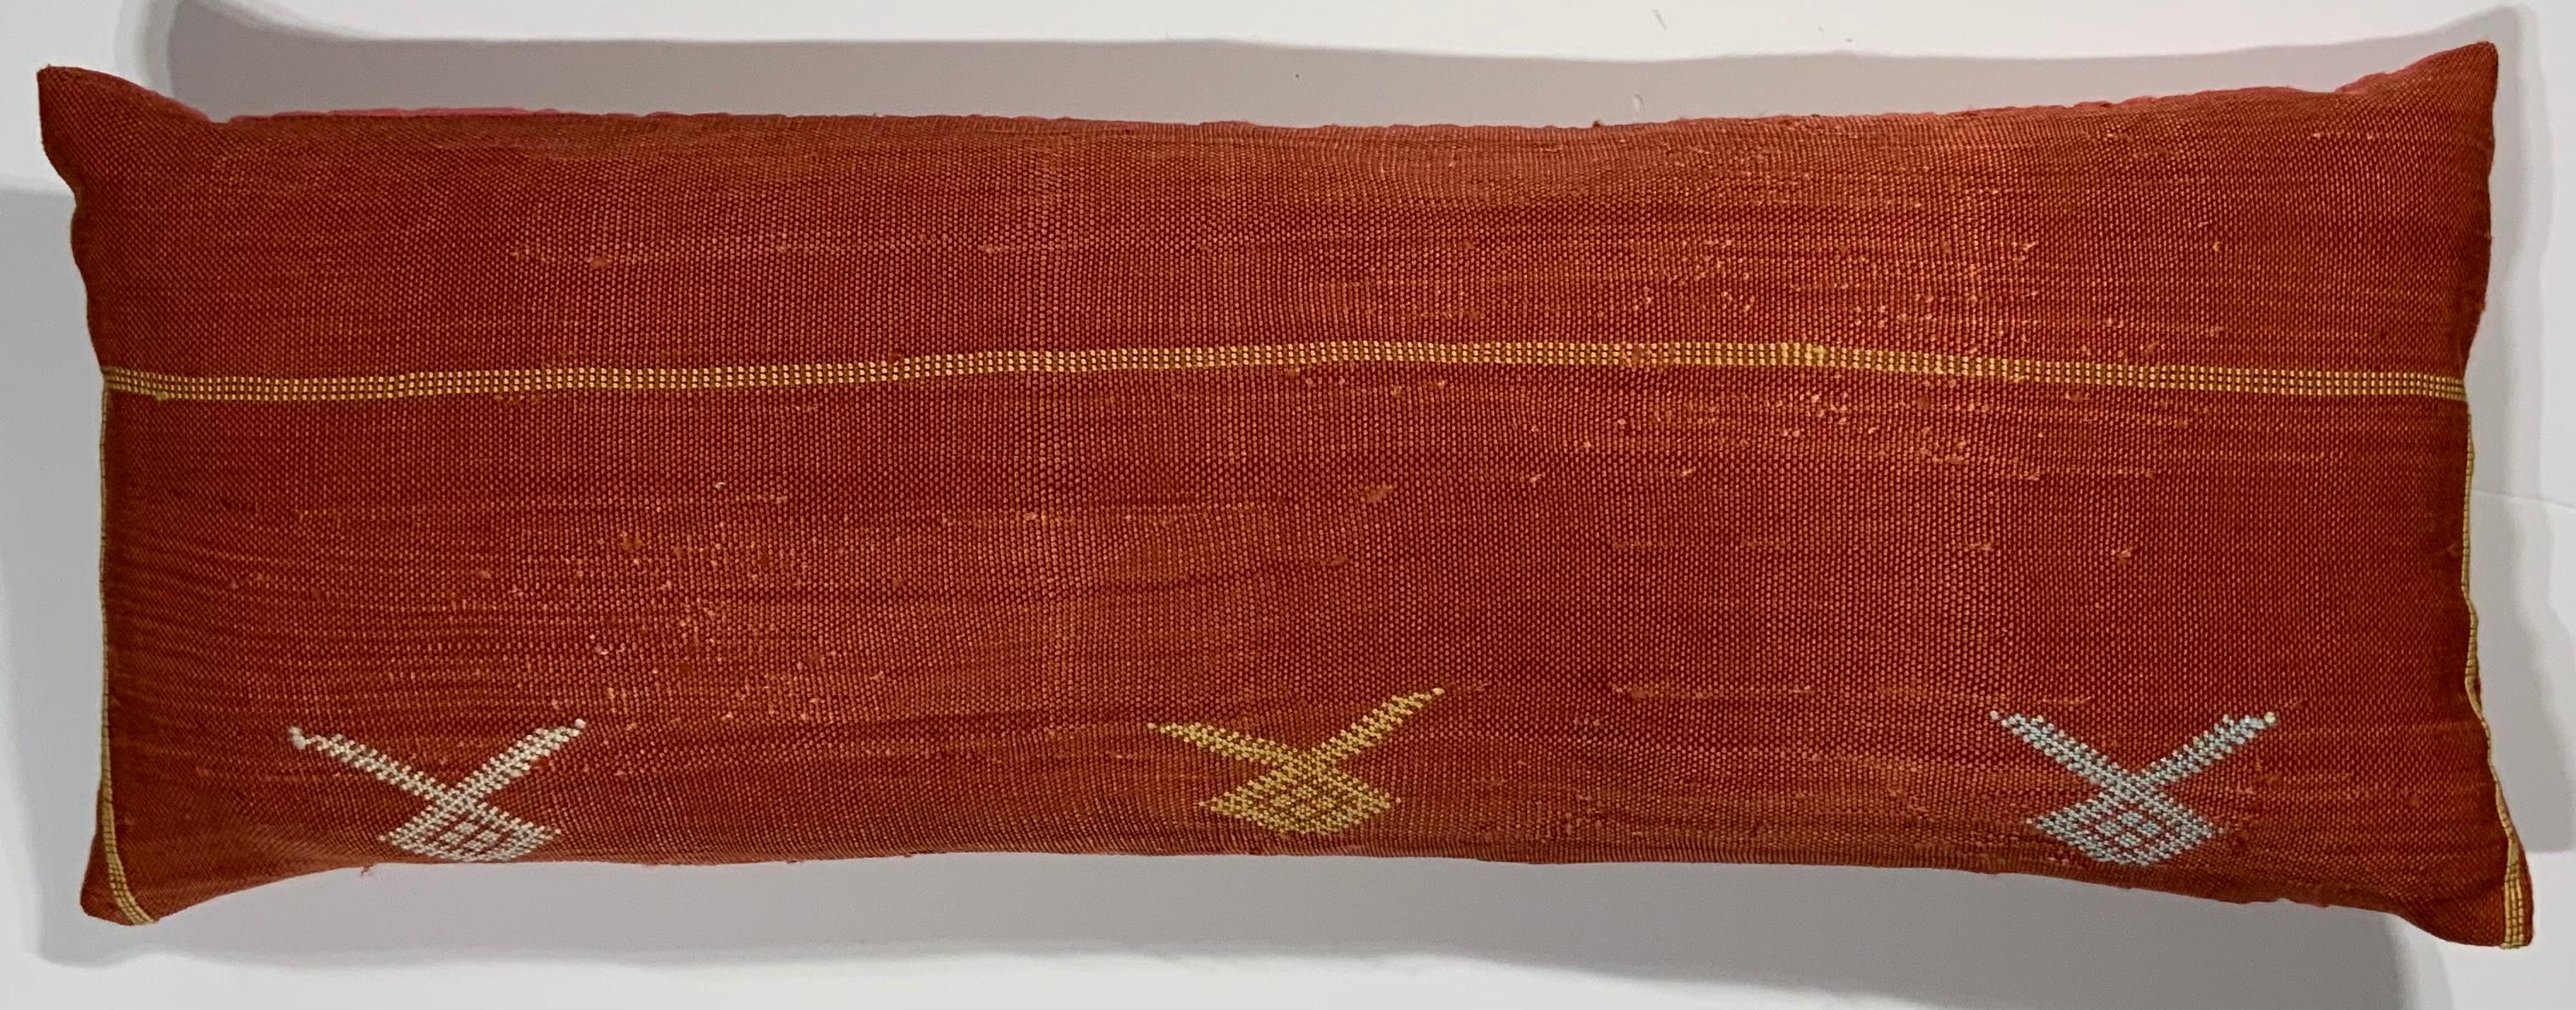 Beautiful pillow made of handwoven flat-weave textile with multi colors geometric motif on a red background, fine silk backing, fresh new down and feather insert.